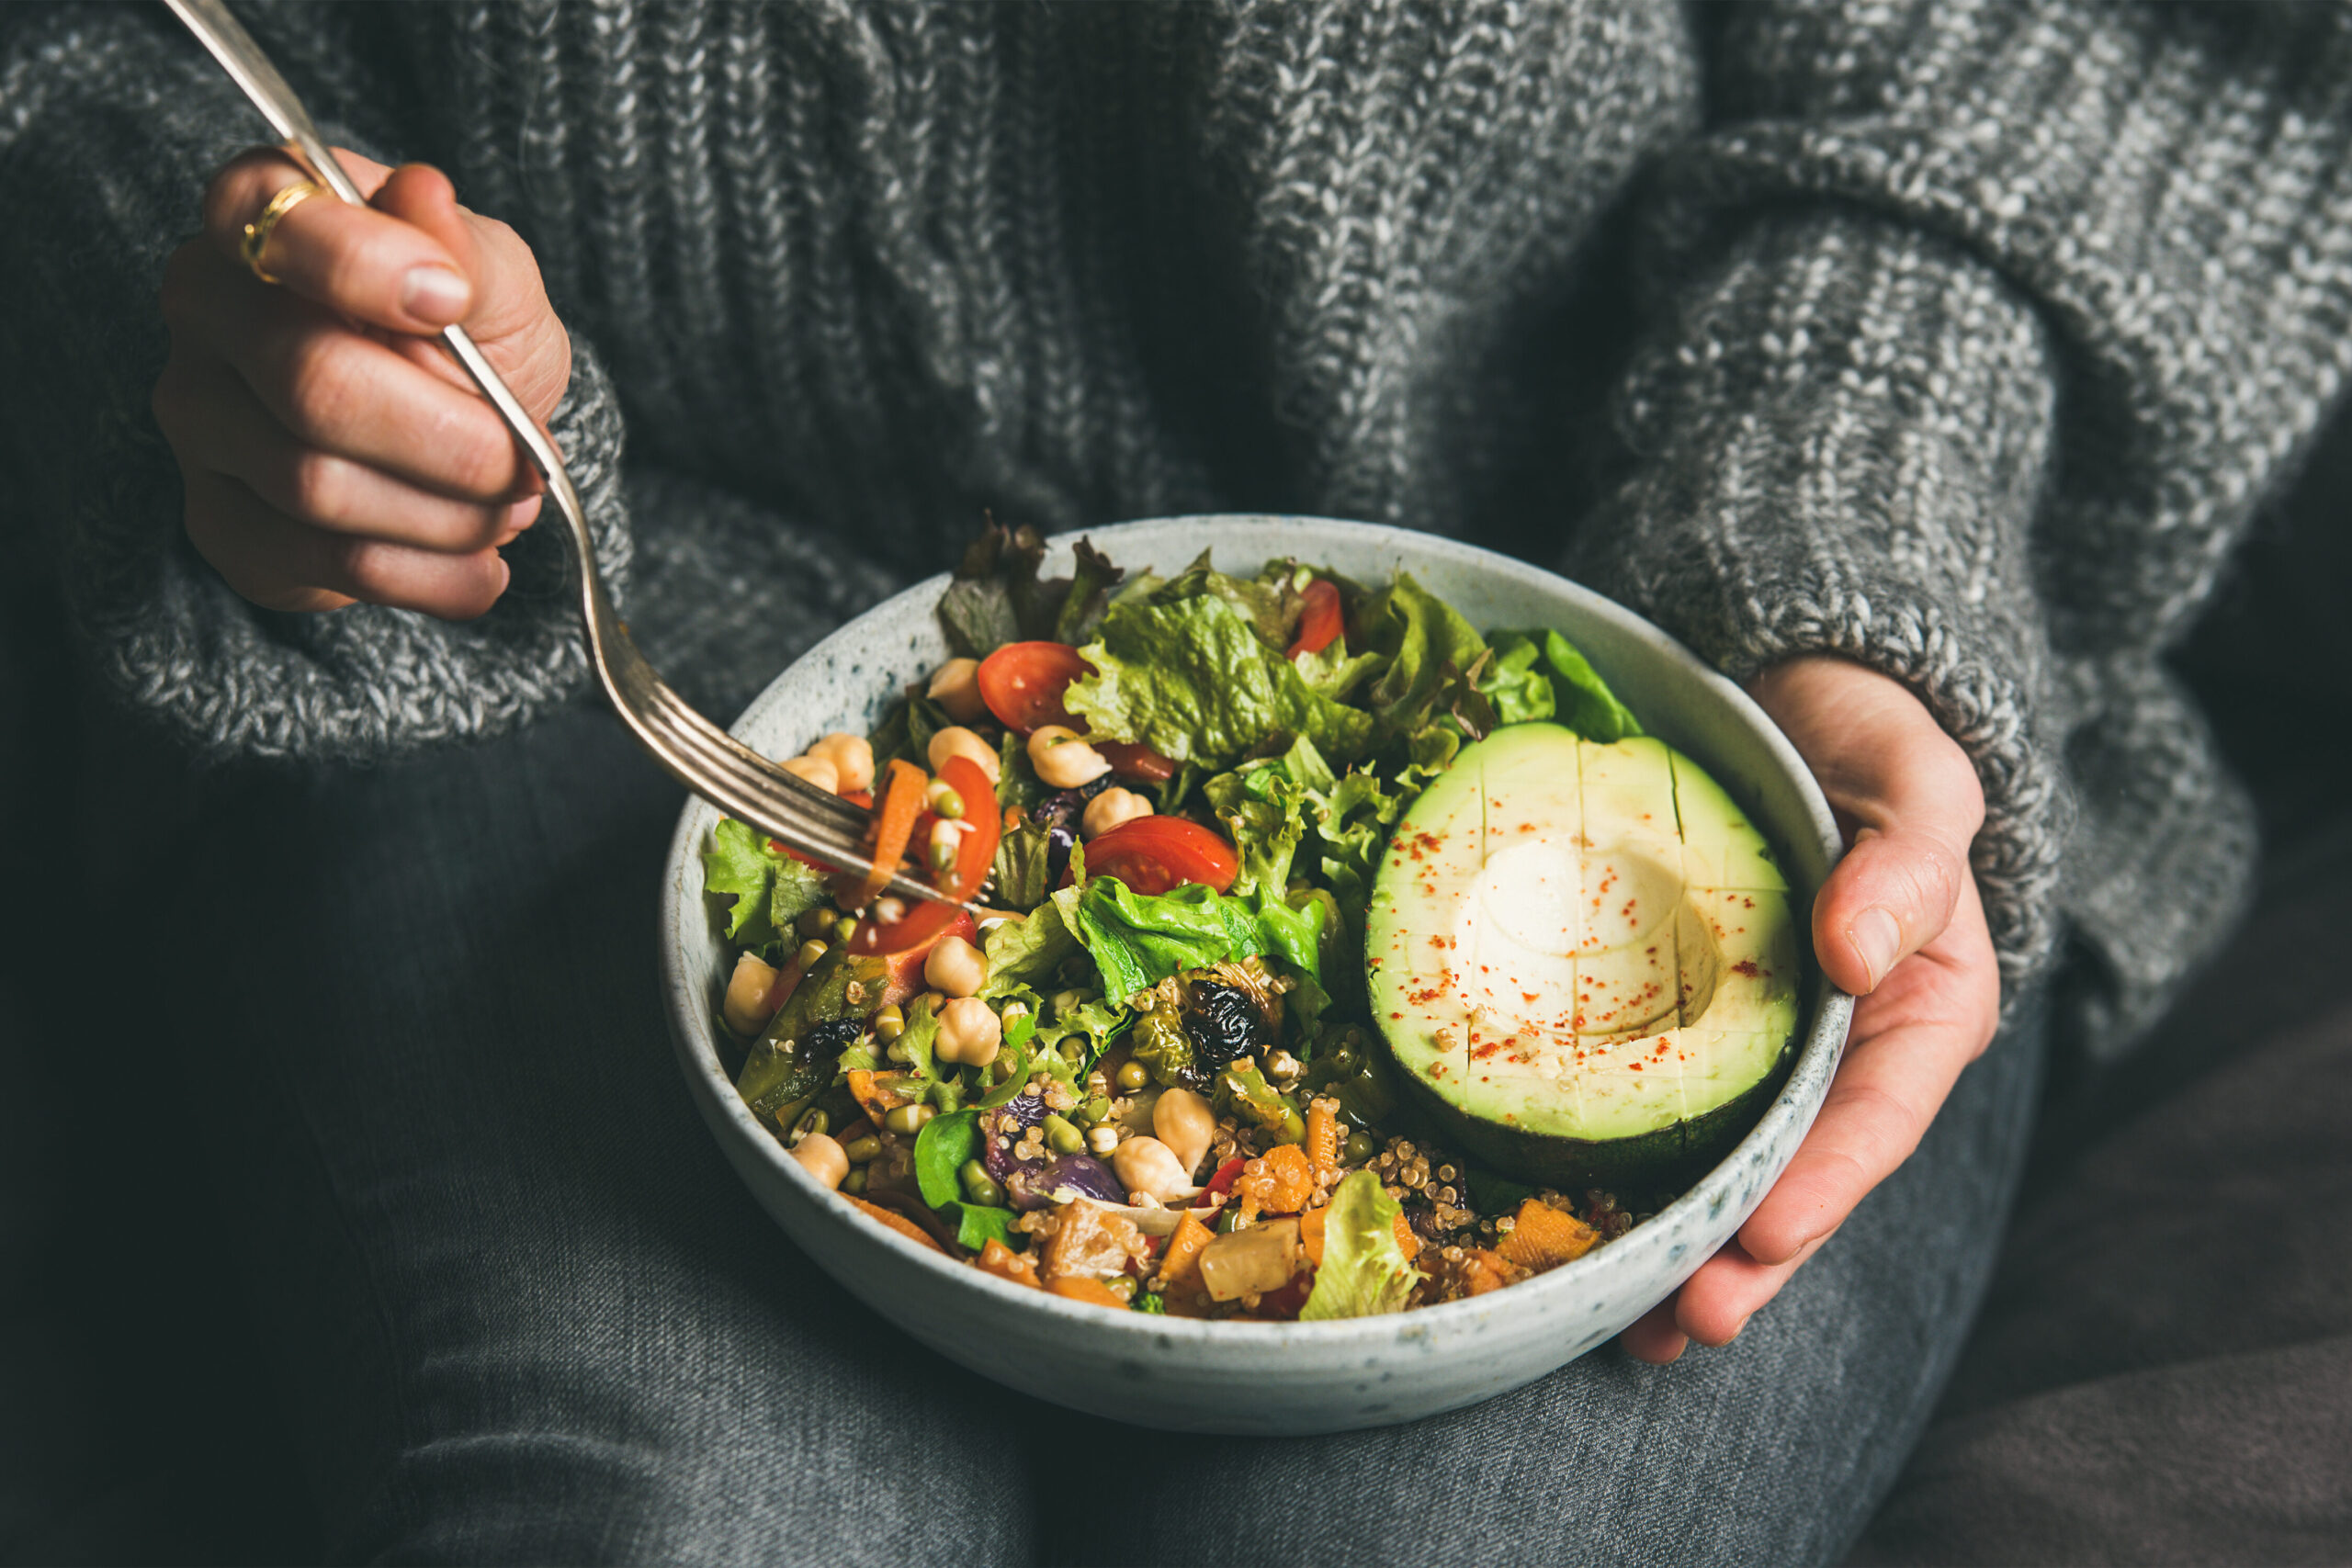 Close up of person holding bowl of lettuce and chickpeas and avocado